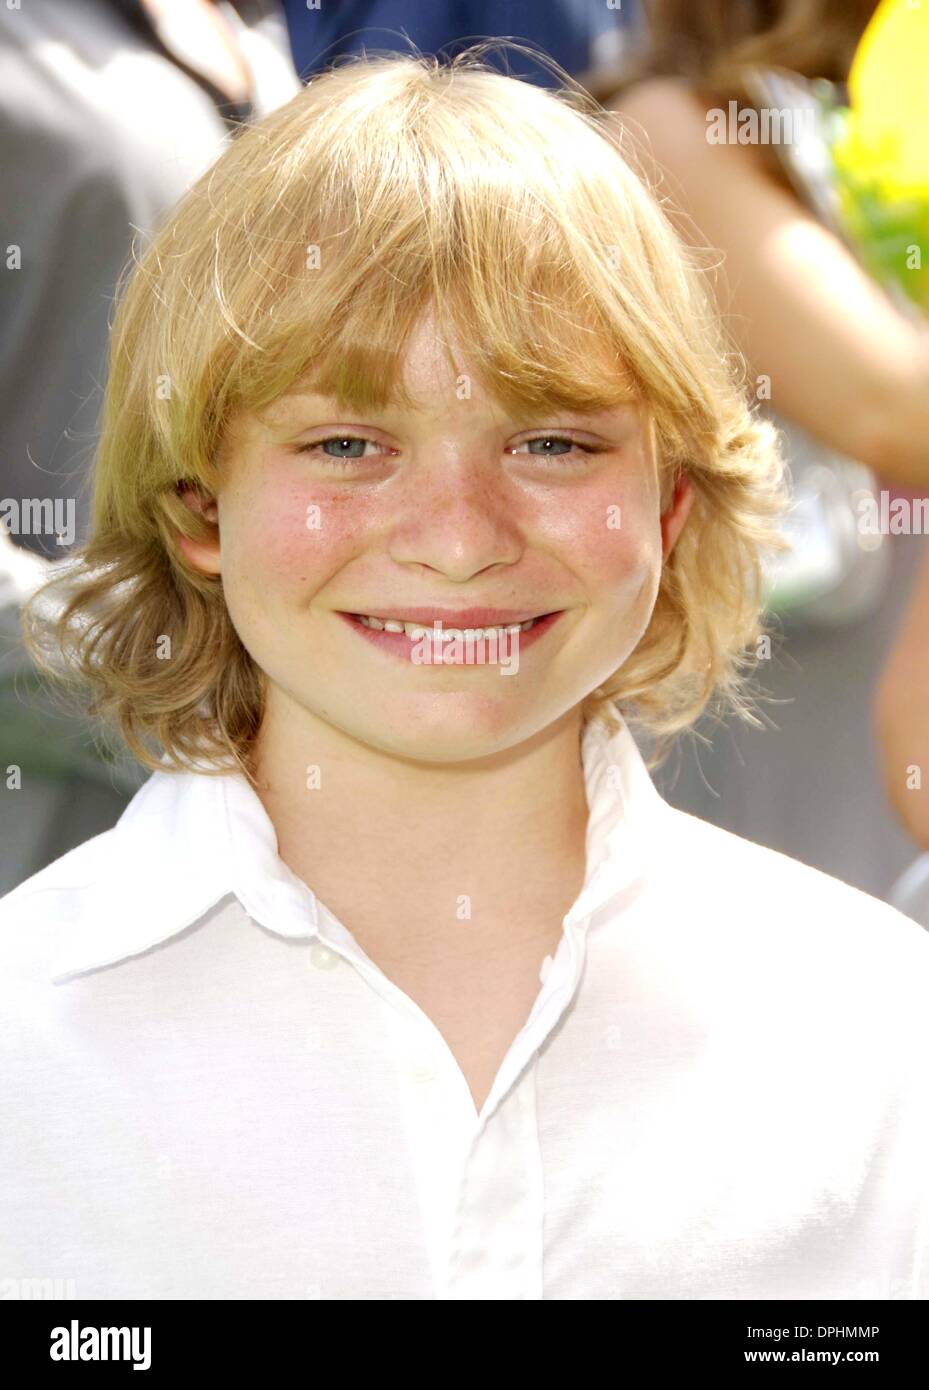 tonto derrocamiento Prevención July 23, 2006 - Hollywood, California, U.S. - LOS ANGELES, CA JULY 23, 2006  (SSI) - -.Actor Jordan Orr during the premiere of the new movie from Warner  Bros. Pictures' THE ANT